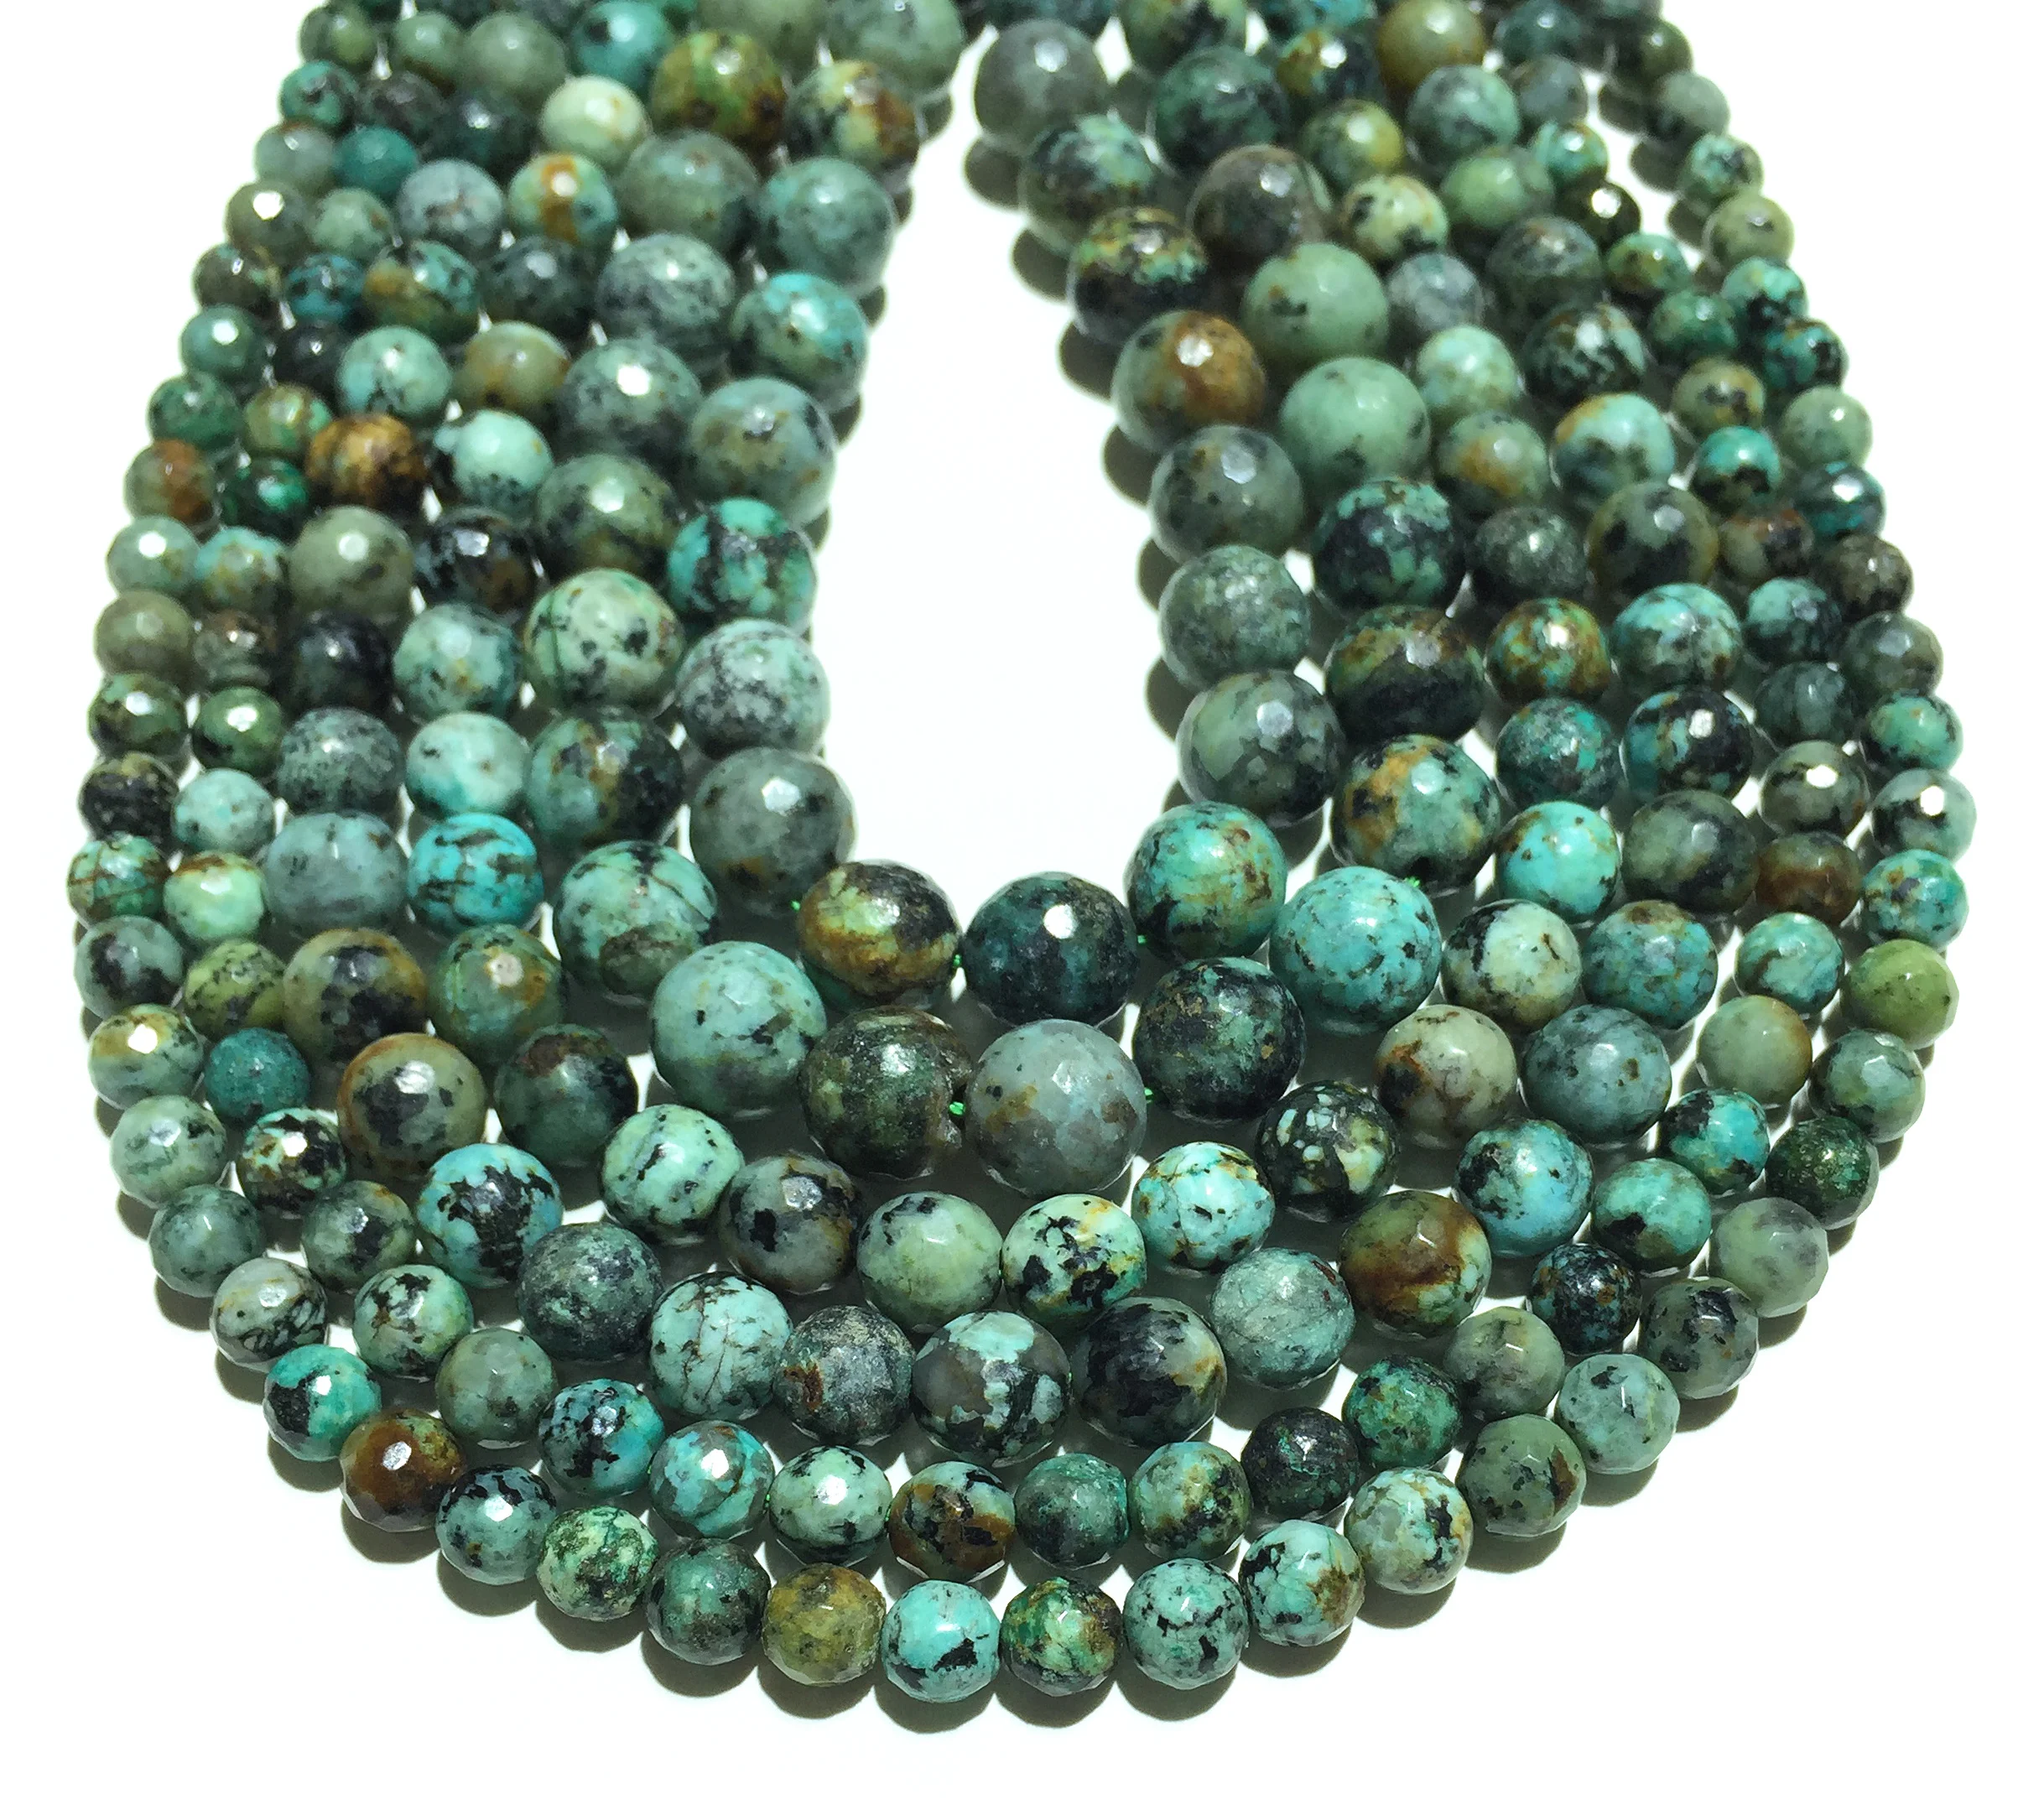 

10mm Natural Faceted African Turquoise Round beads Gemstone Loose Spacer Beads Jewelry Making DIY Bracelet Necklace Accessories